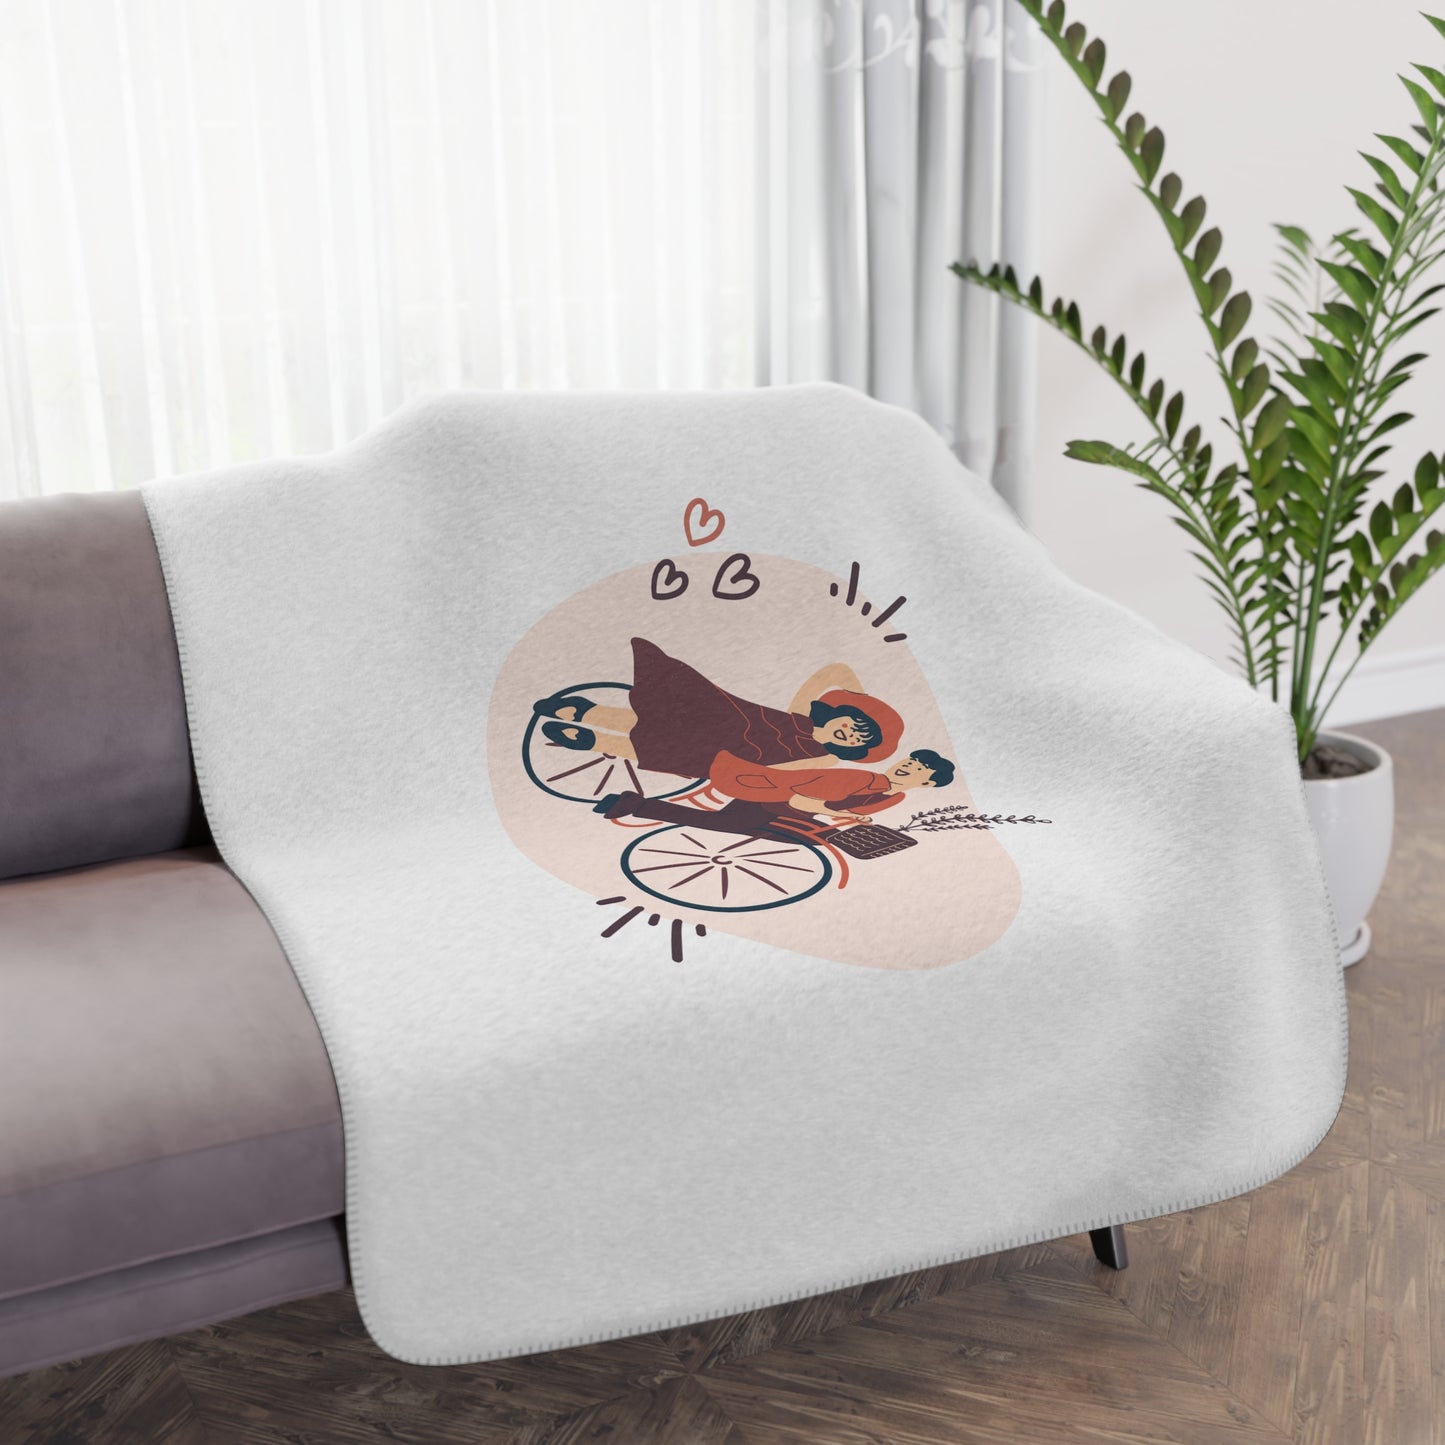 Couple on Cycle Printed Tan Sherpa Blanket for Valentine Day